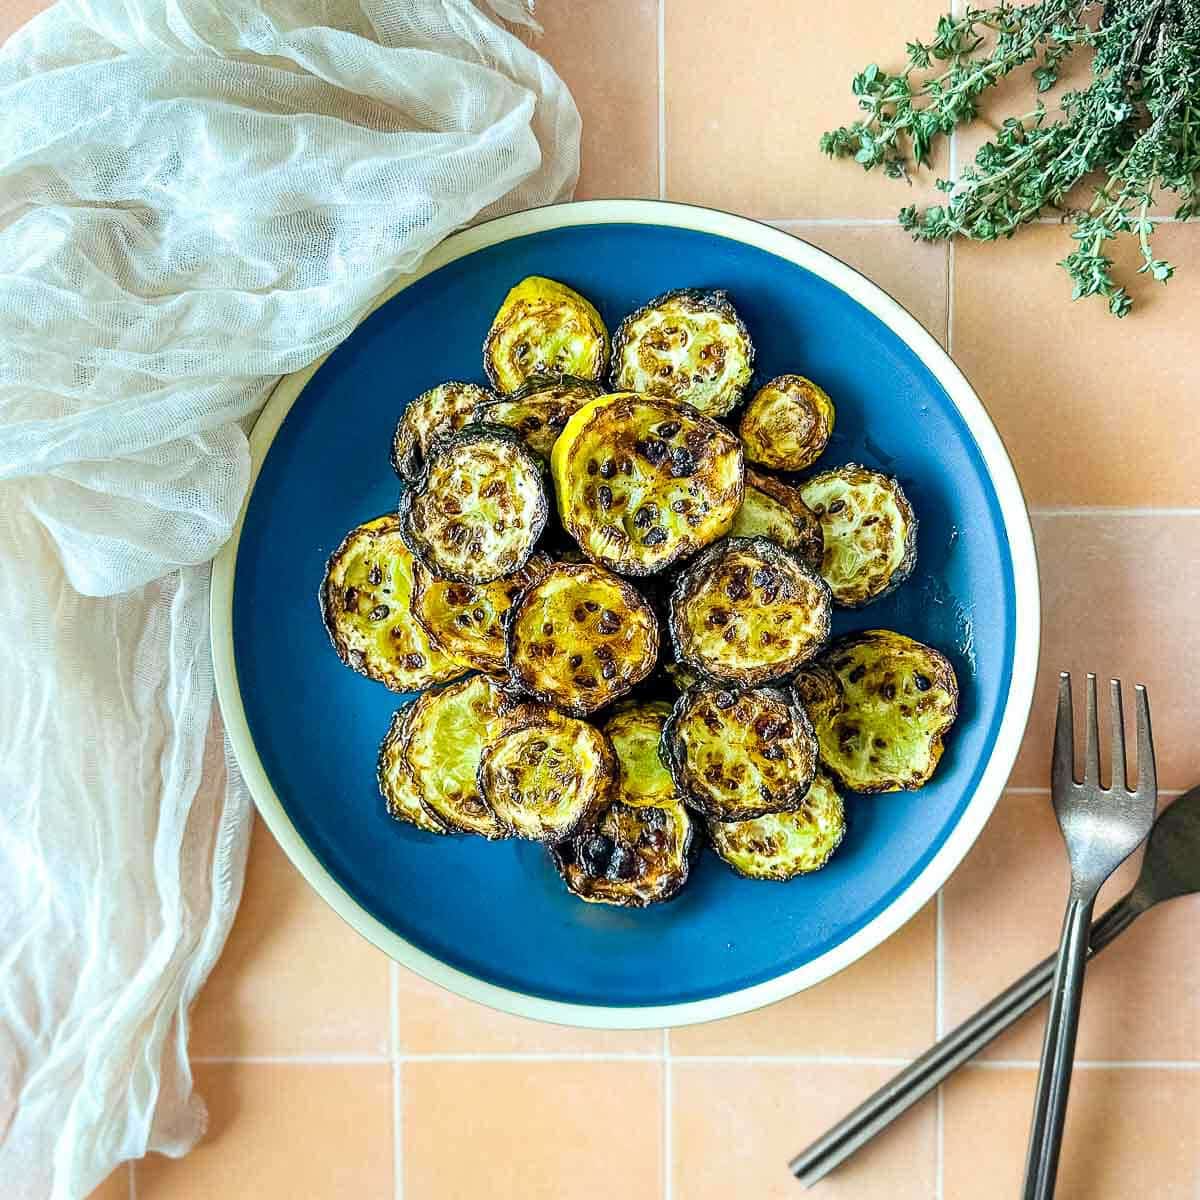 Air fryer zucchini and squash on a blue plate.